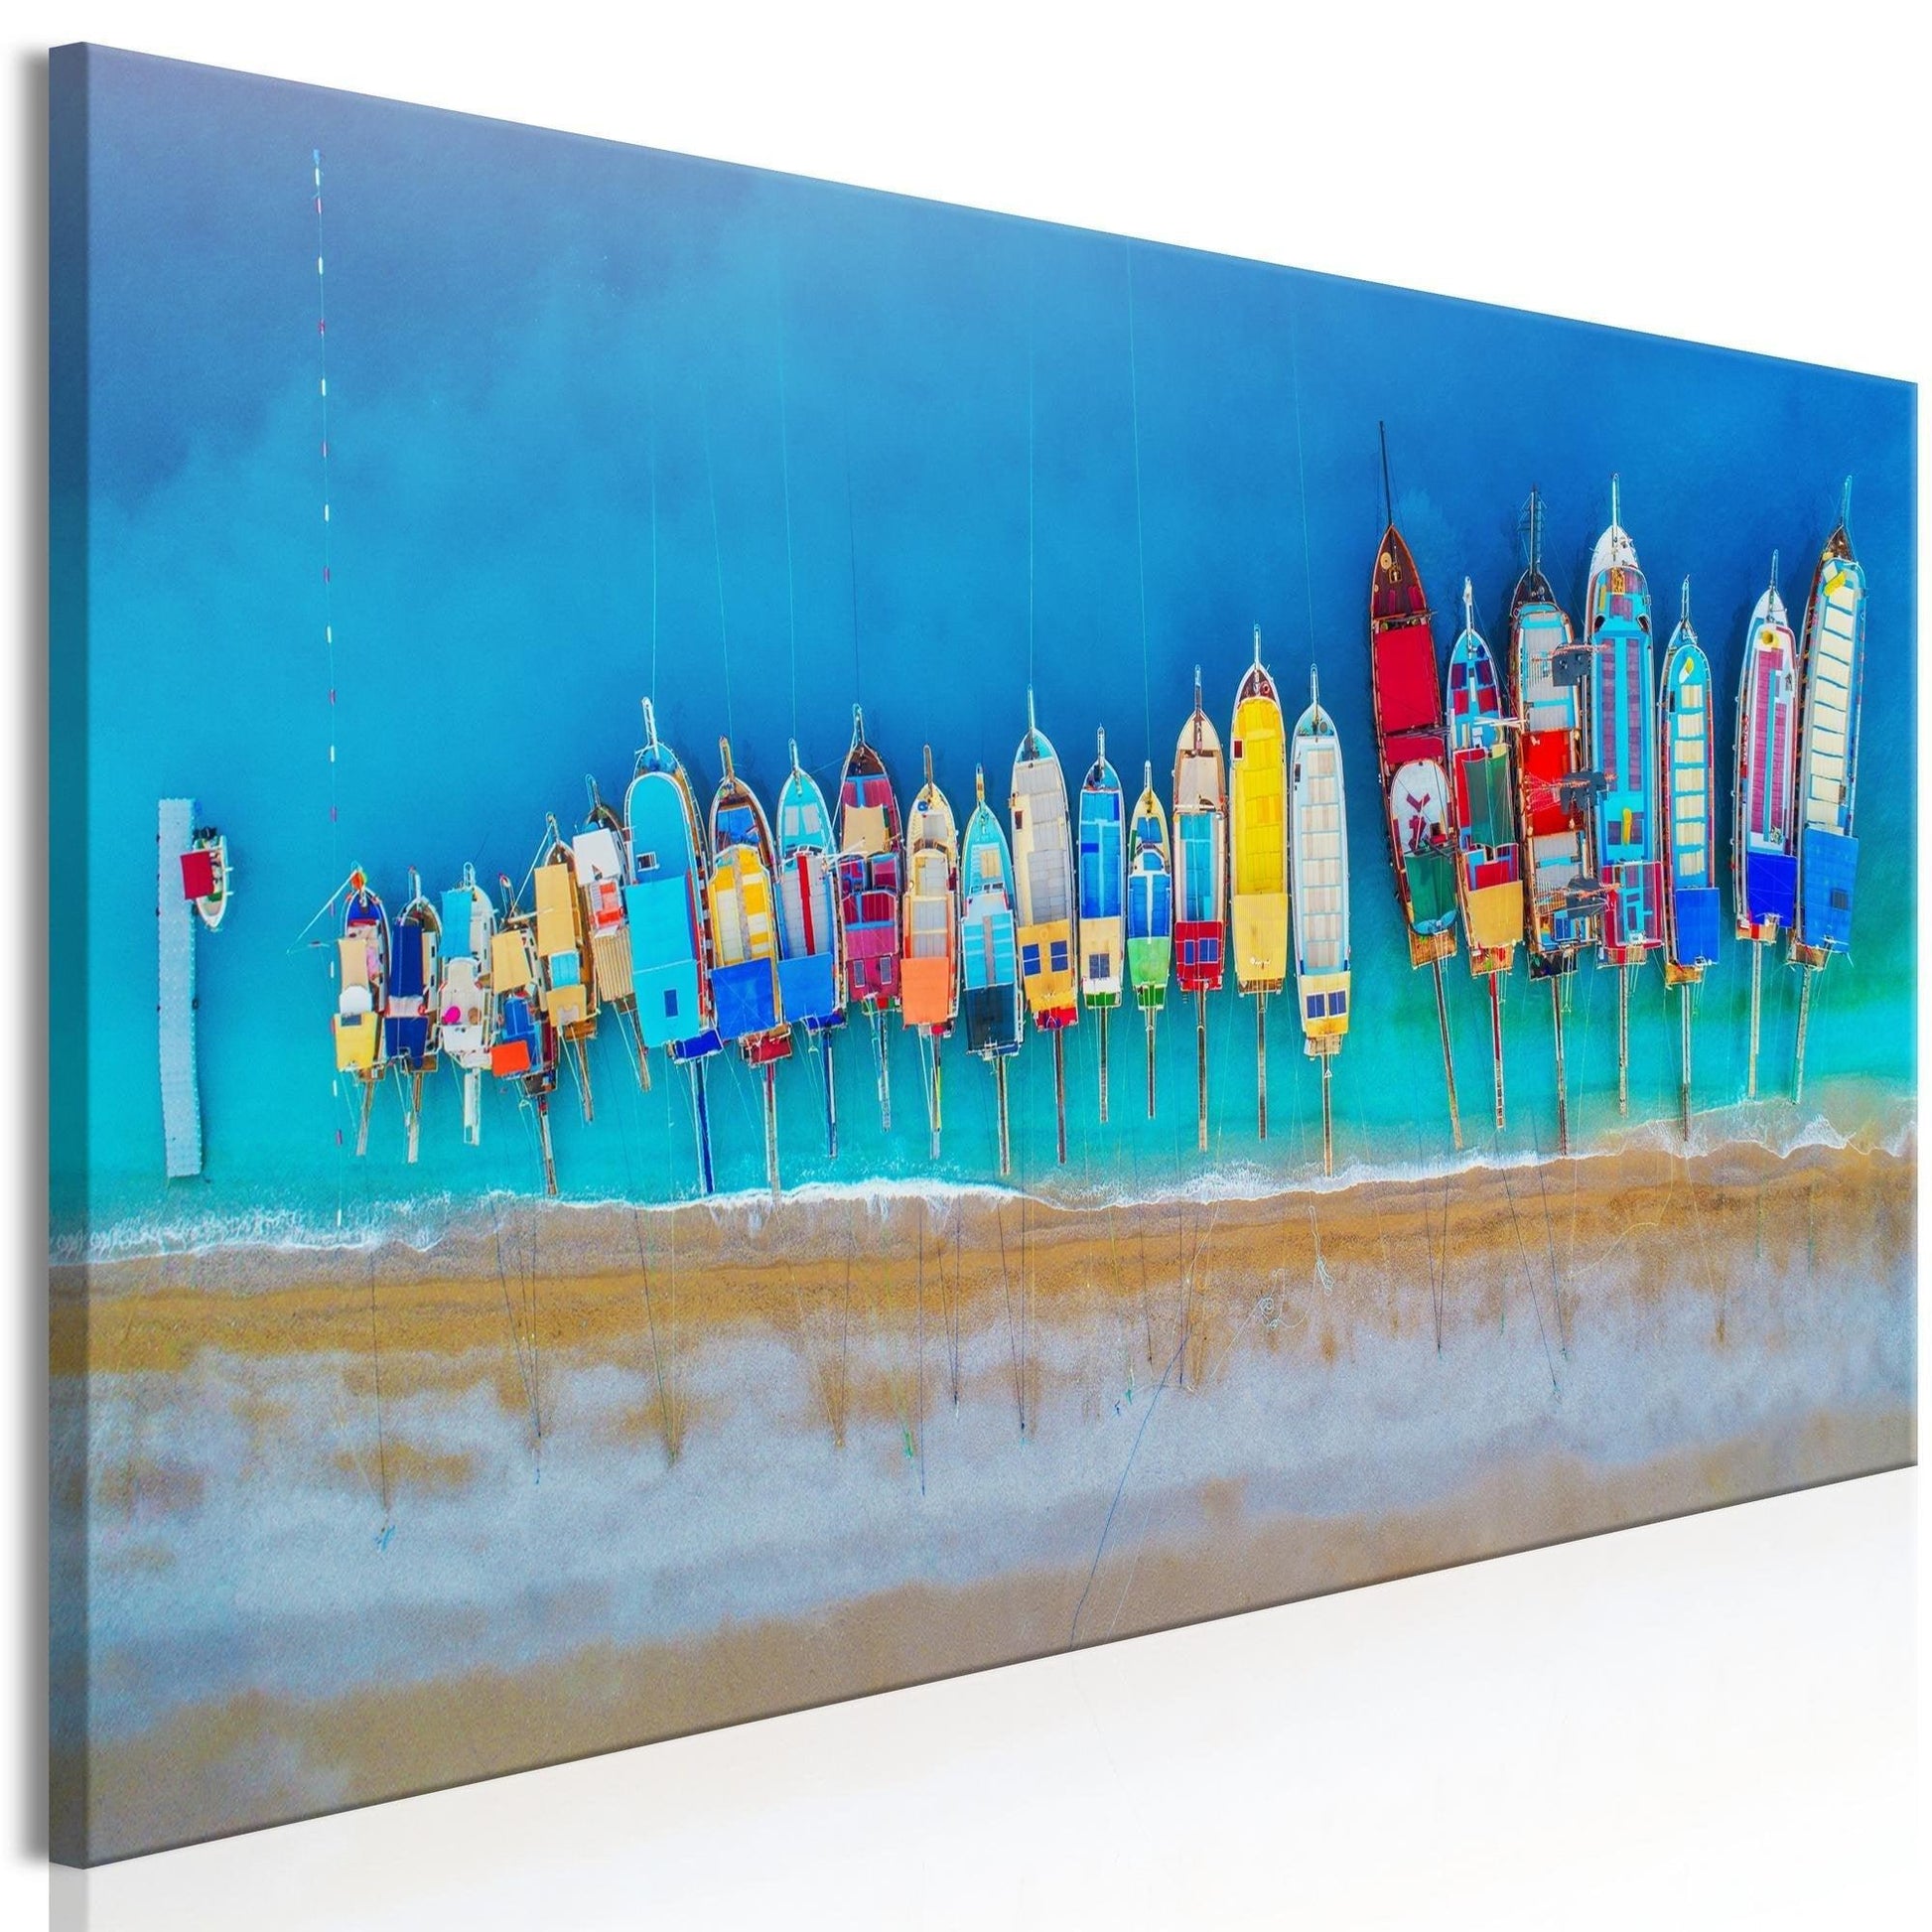 Canvas Print - Colourful Boats (1 Part) Narrow - www.trendingbestsellers.com